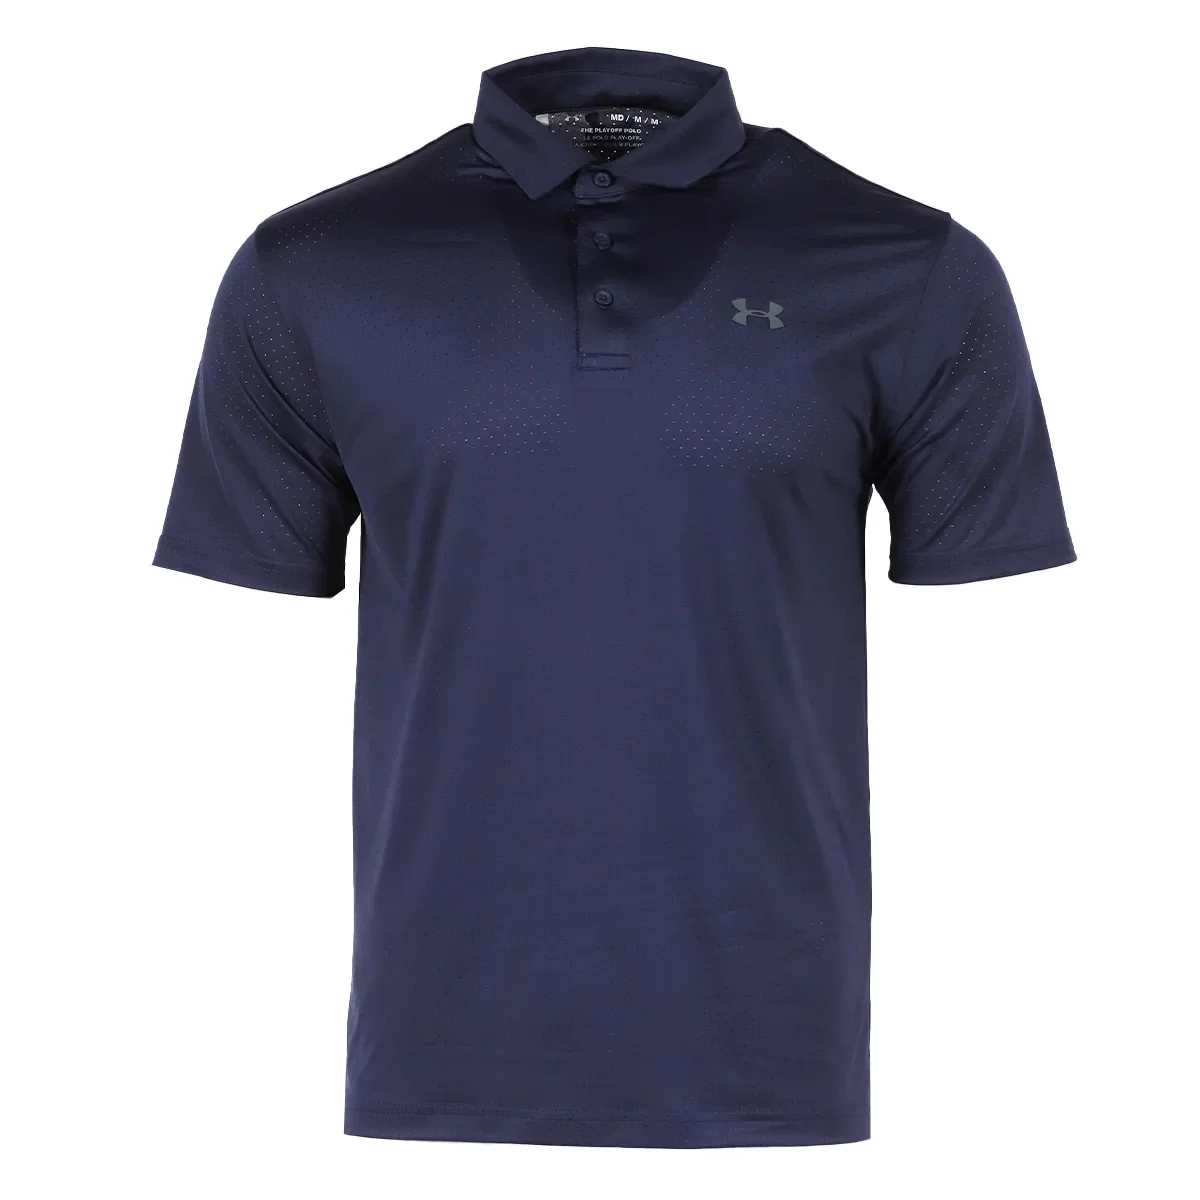 Image of Under Armour Men's Aerated Polo